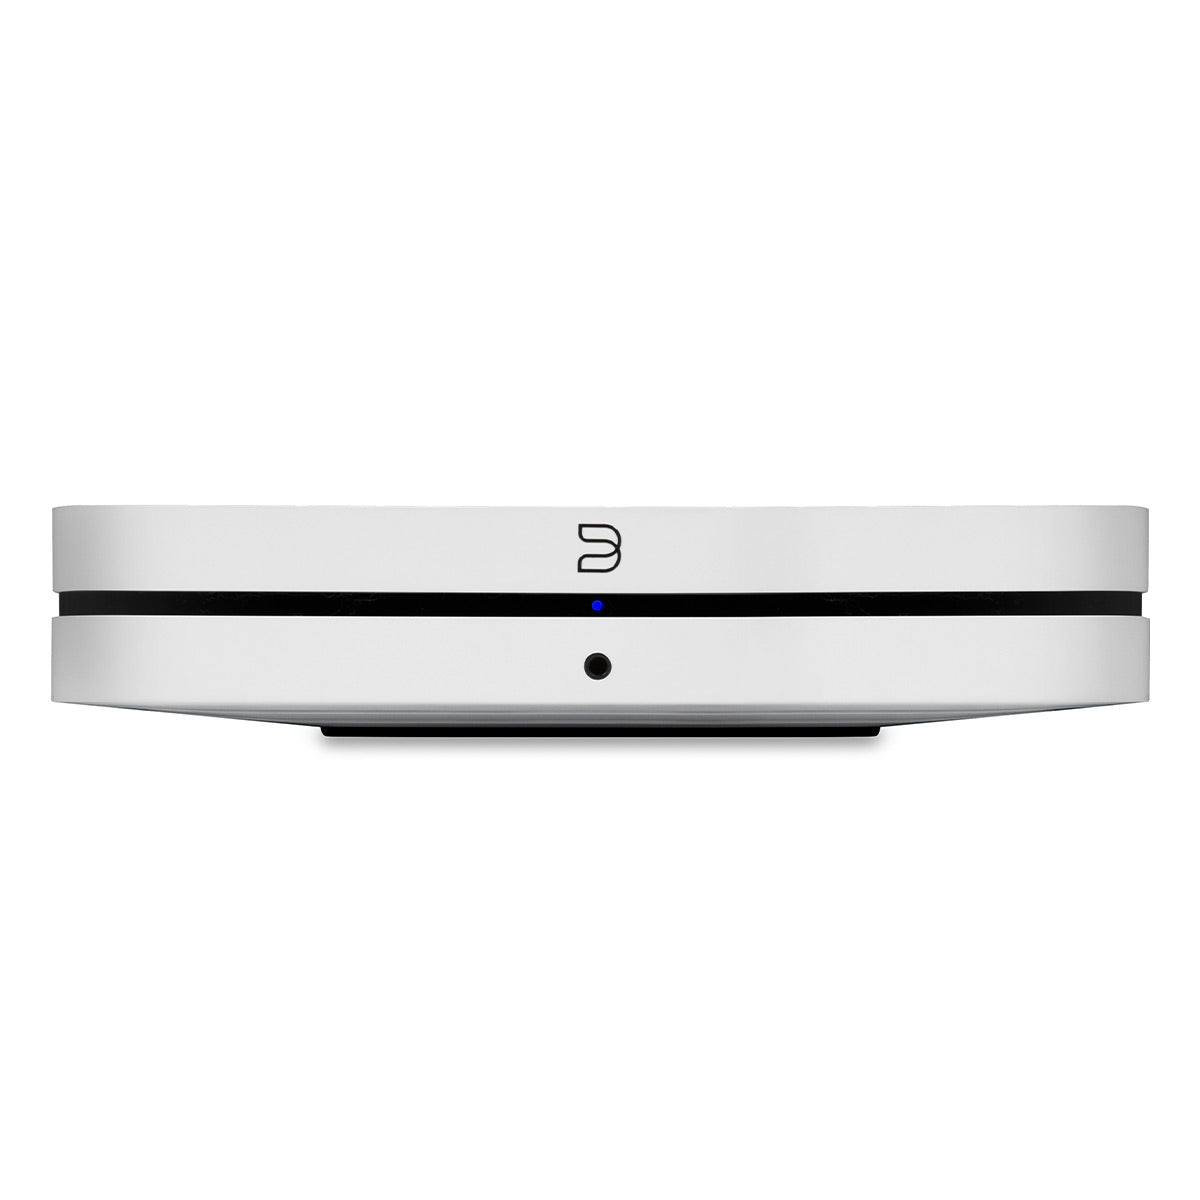 Bluesound Node Wireless Multi-Room Hi-Res Music Streamer - Gen 3 (White) with RC1 Remote Control for BluOS Systems